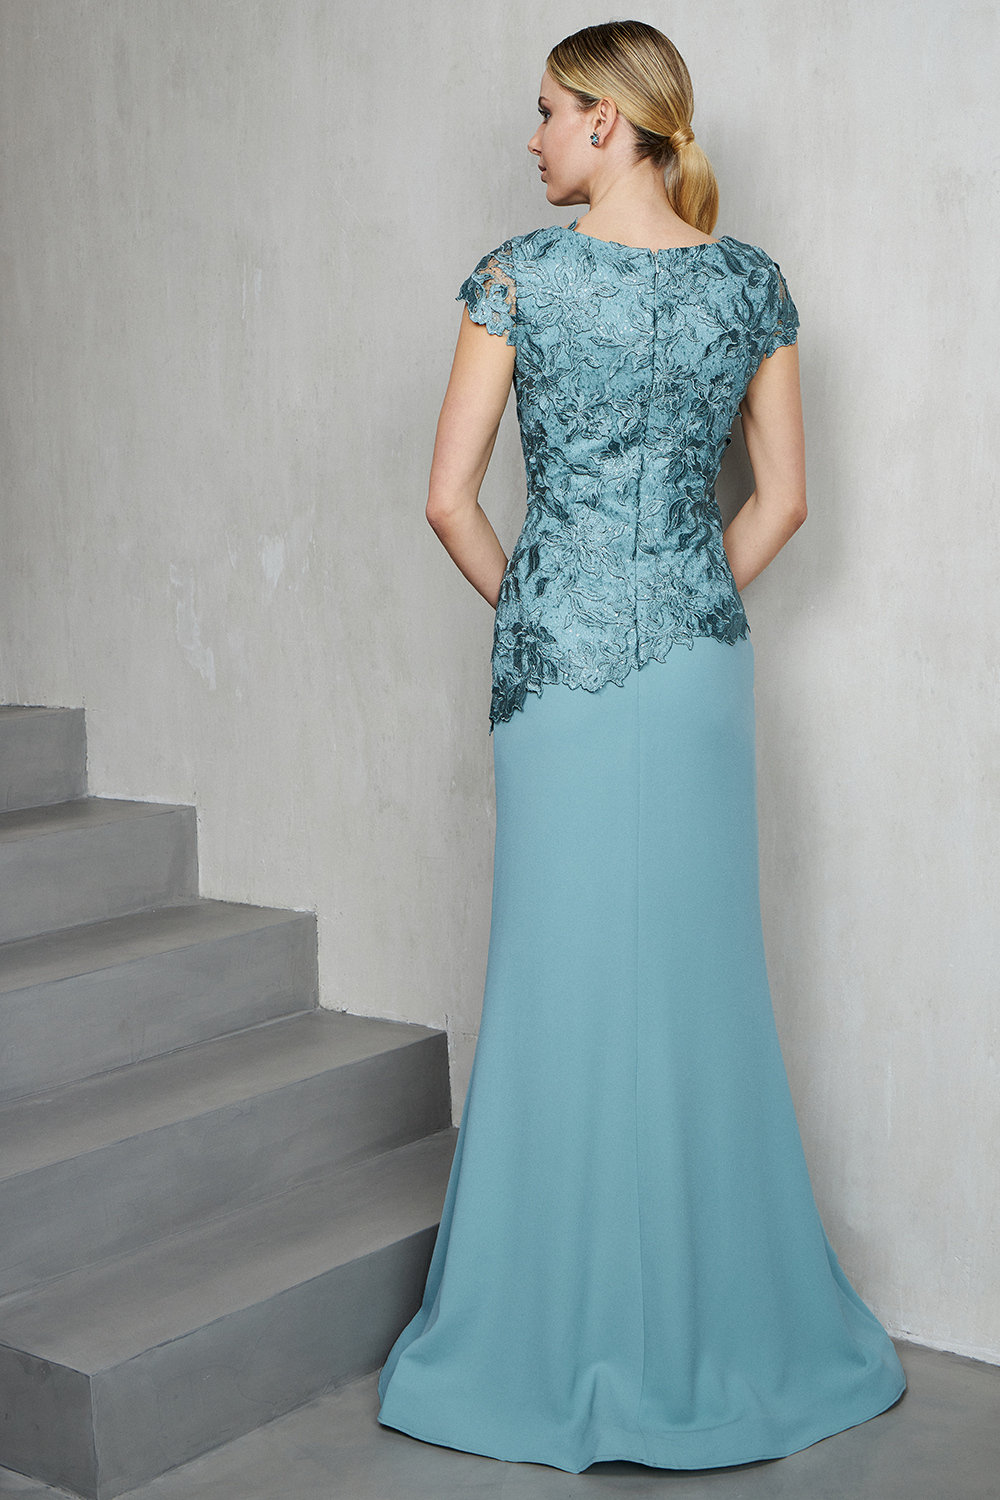 Классические платья / Long evening dress with lace top for the mother of the bride